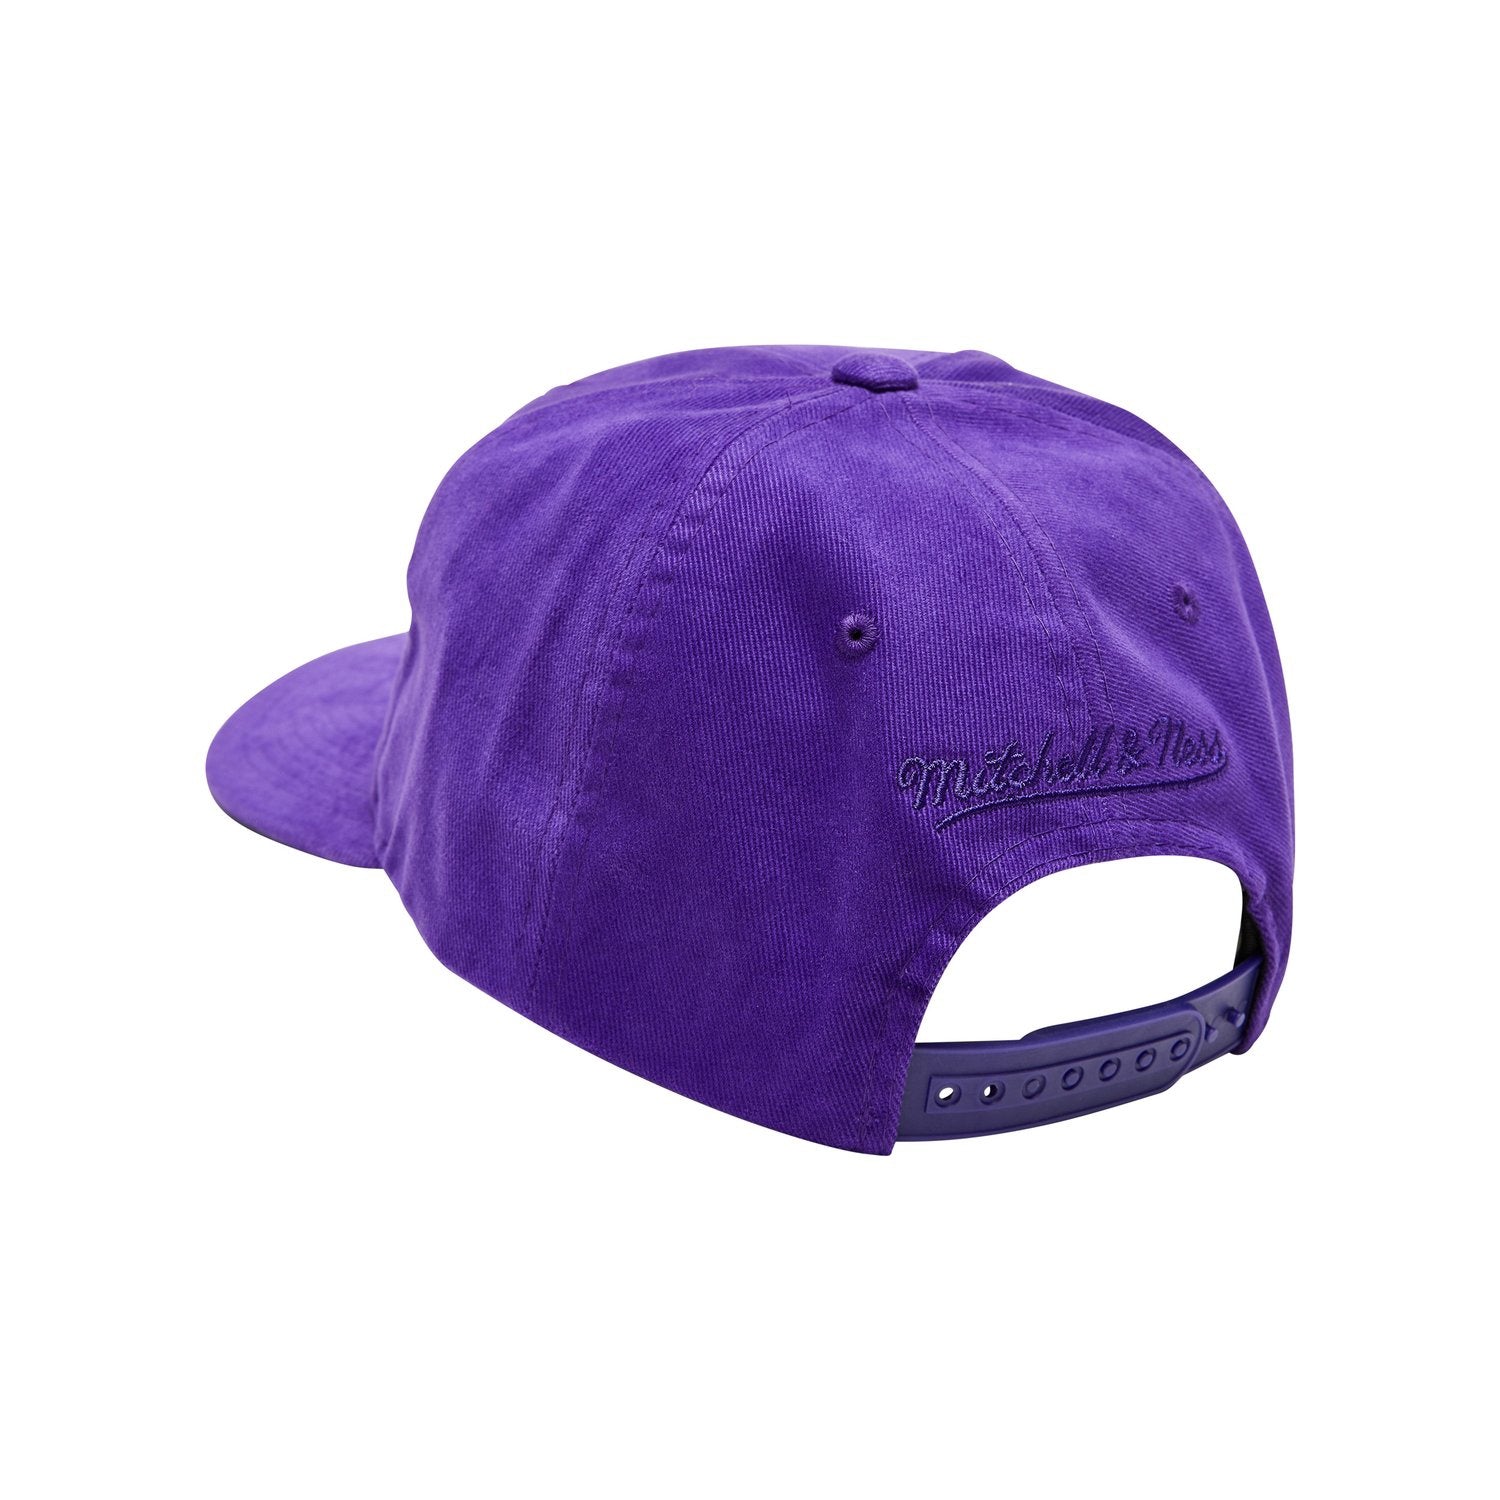 MITCHELL & NESS L.A LAKERS FINALS HISTORY DEADSTOCK SNAPBACK 1987